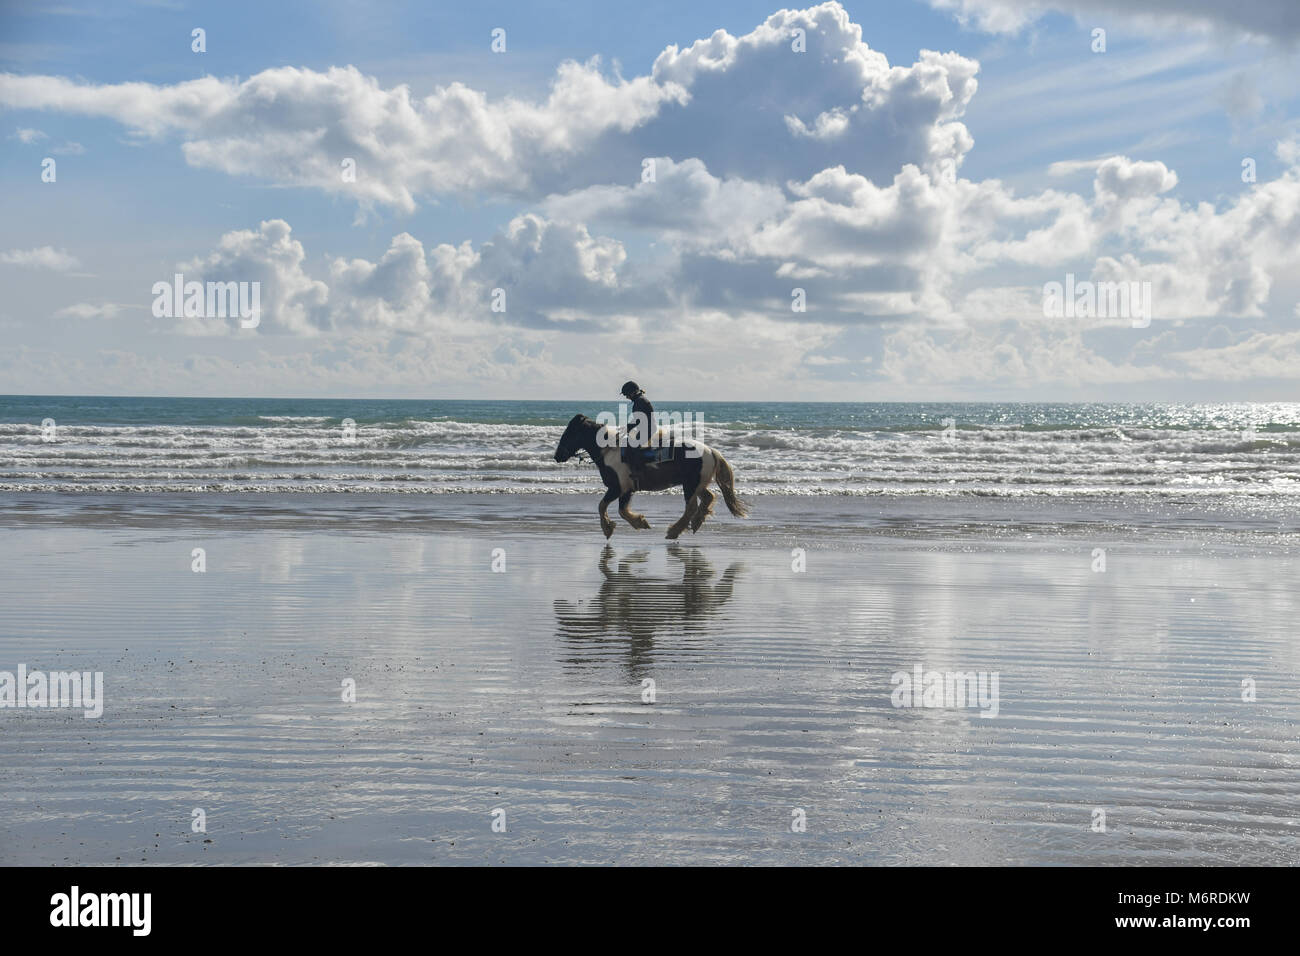 Marazion, Cornwall, UK. 6th March 2018. UK Weather. What a difference a week makes - last week St Michaels Mount was covered in snow, today the temperature reached over 12 degrees C, with surfers and horse riders out enjoying the sunshine. Cornwall was as warm as parts of the South of France  this afternoon Credit: Simon Maycock/Alamy Live News Stock Photo